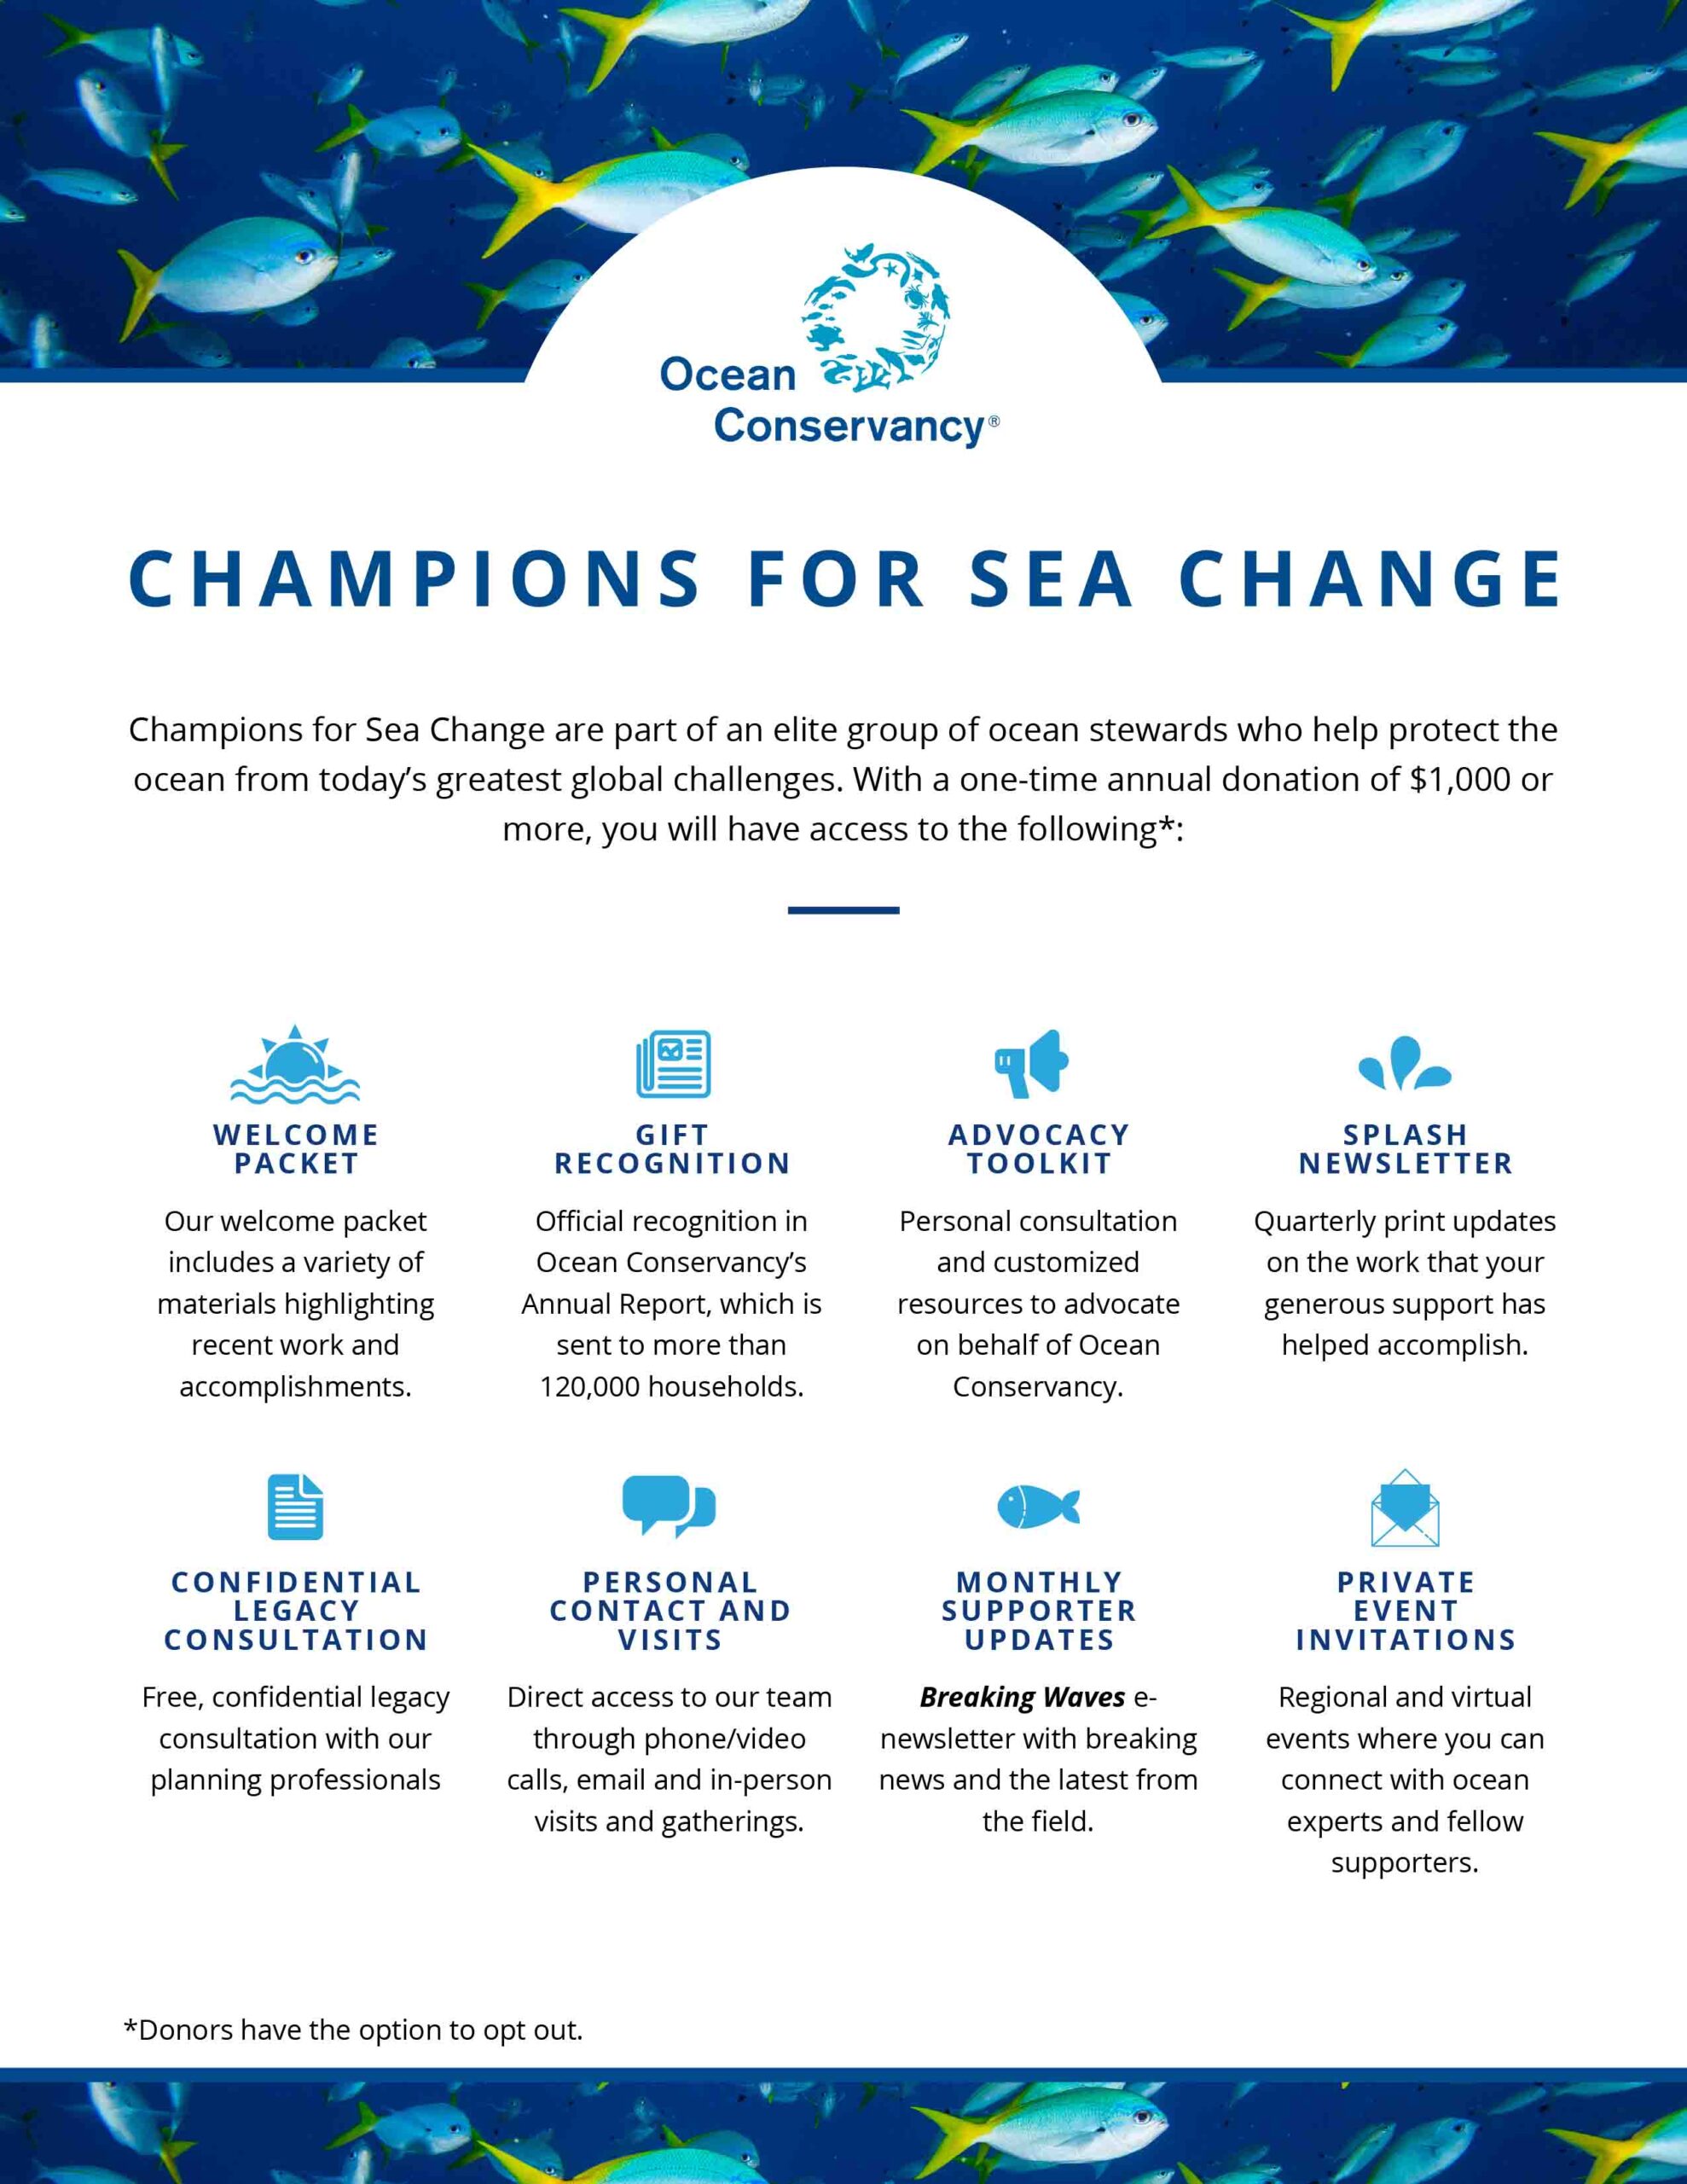 Champions for Sea Change are part of an elite group of ocean stewards who help protect the ocean from today’s greatest global challenges. With a one-time annual donation of $1,000 or more, you will have access to the following*: